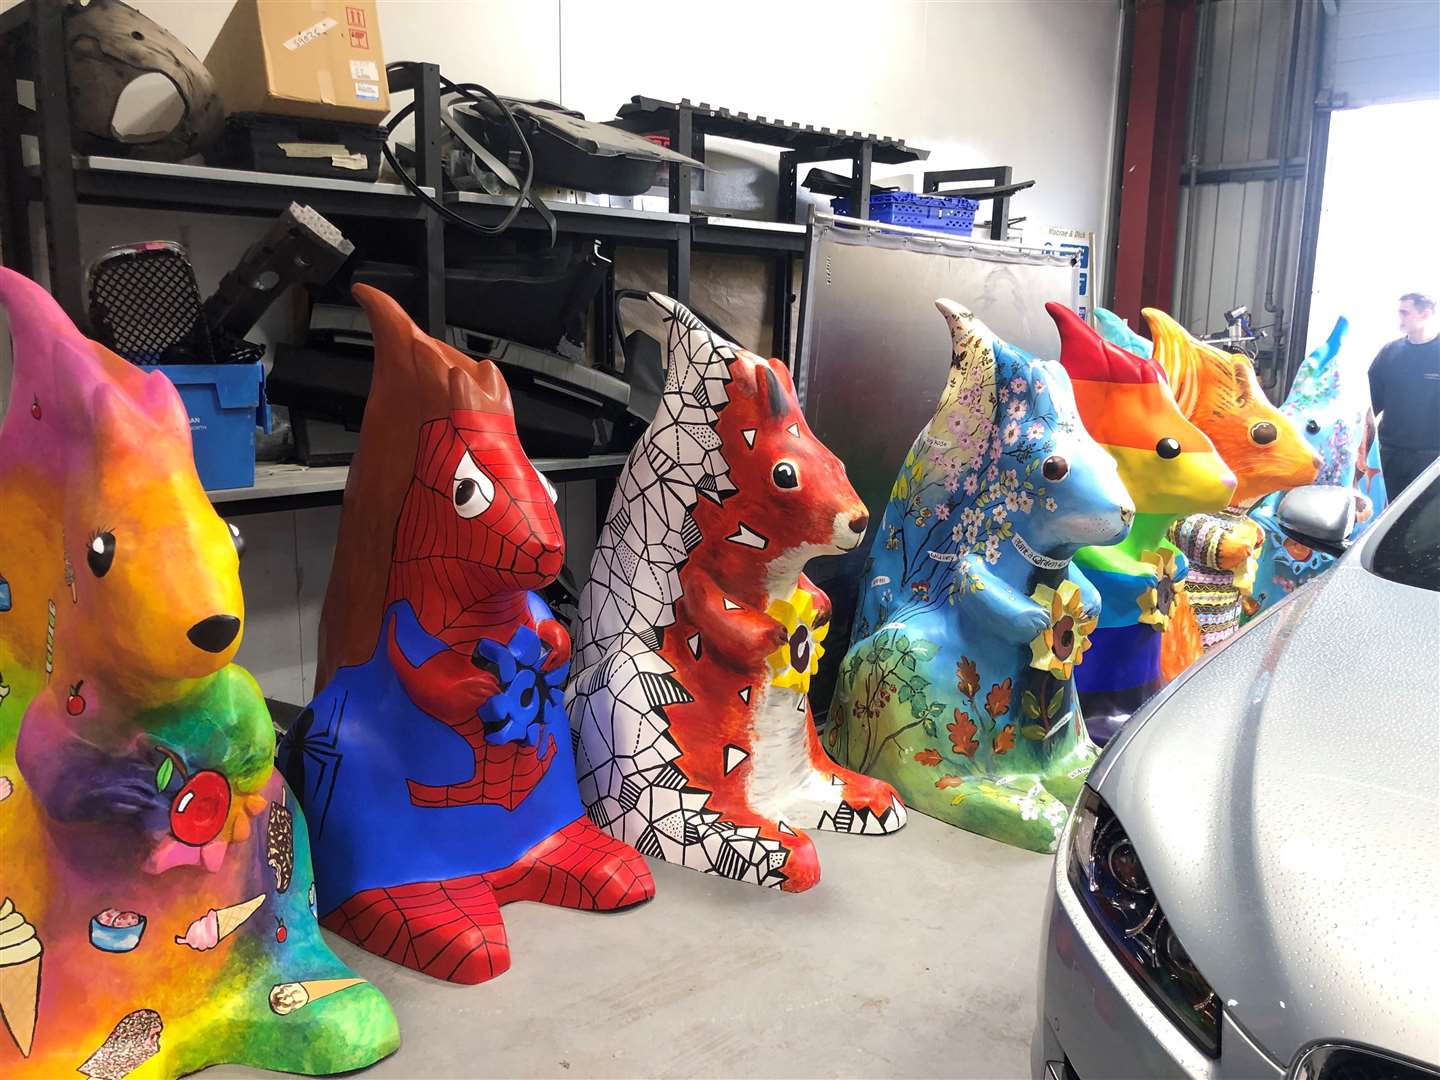 The squirrel statues have all been individually designed and painted by a team of artists.